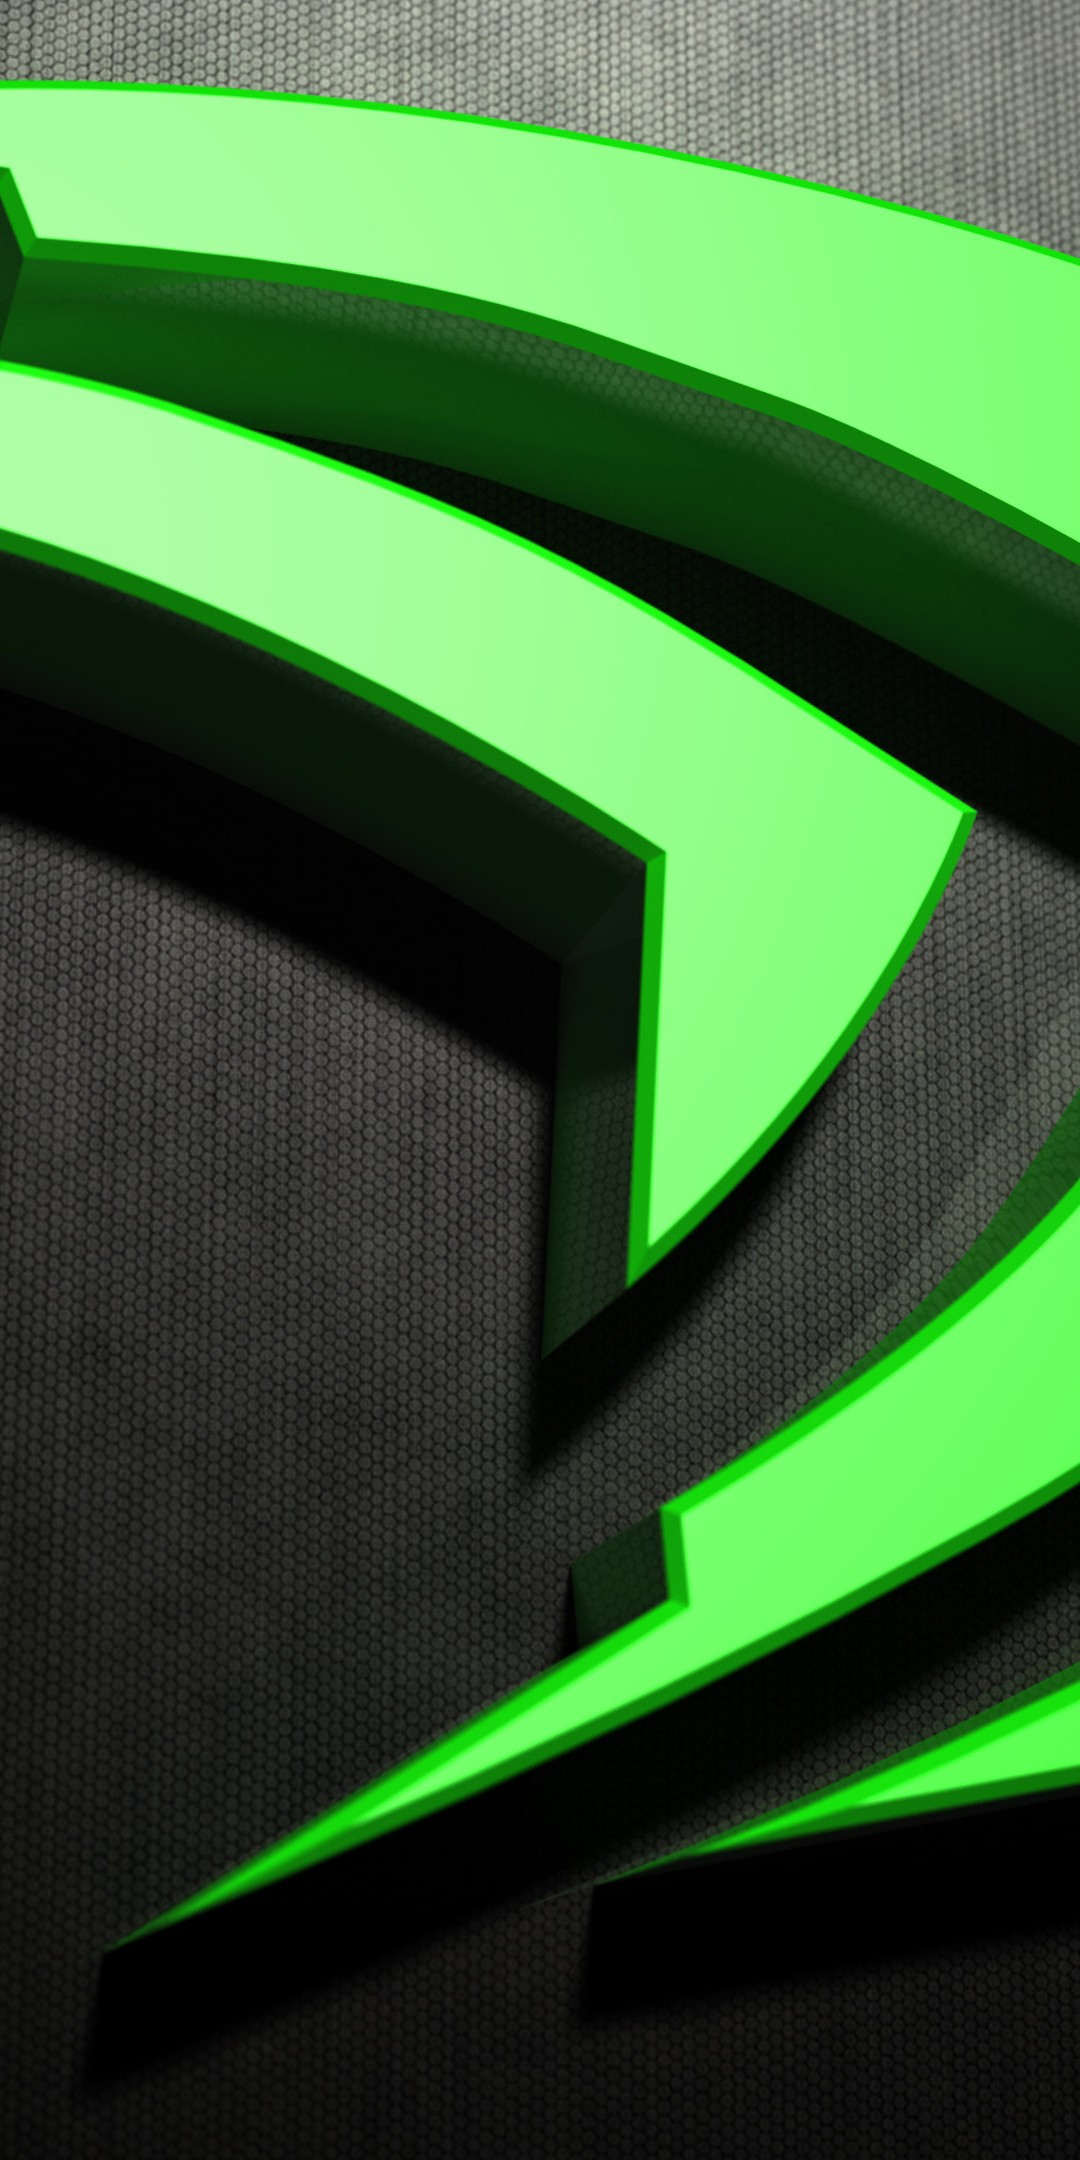 Free GeForce Wallpapers for your Gaming Rig  NVIDIA